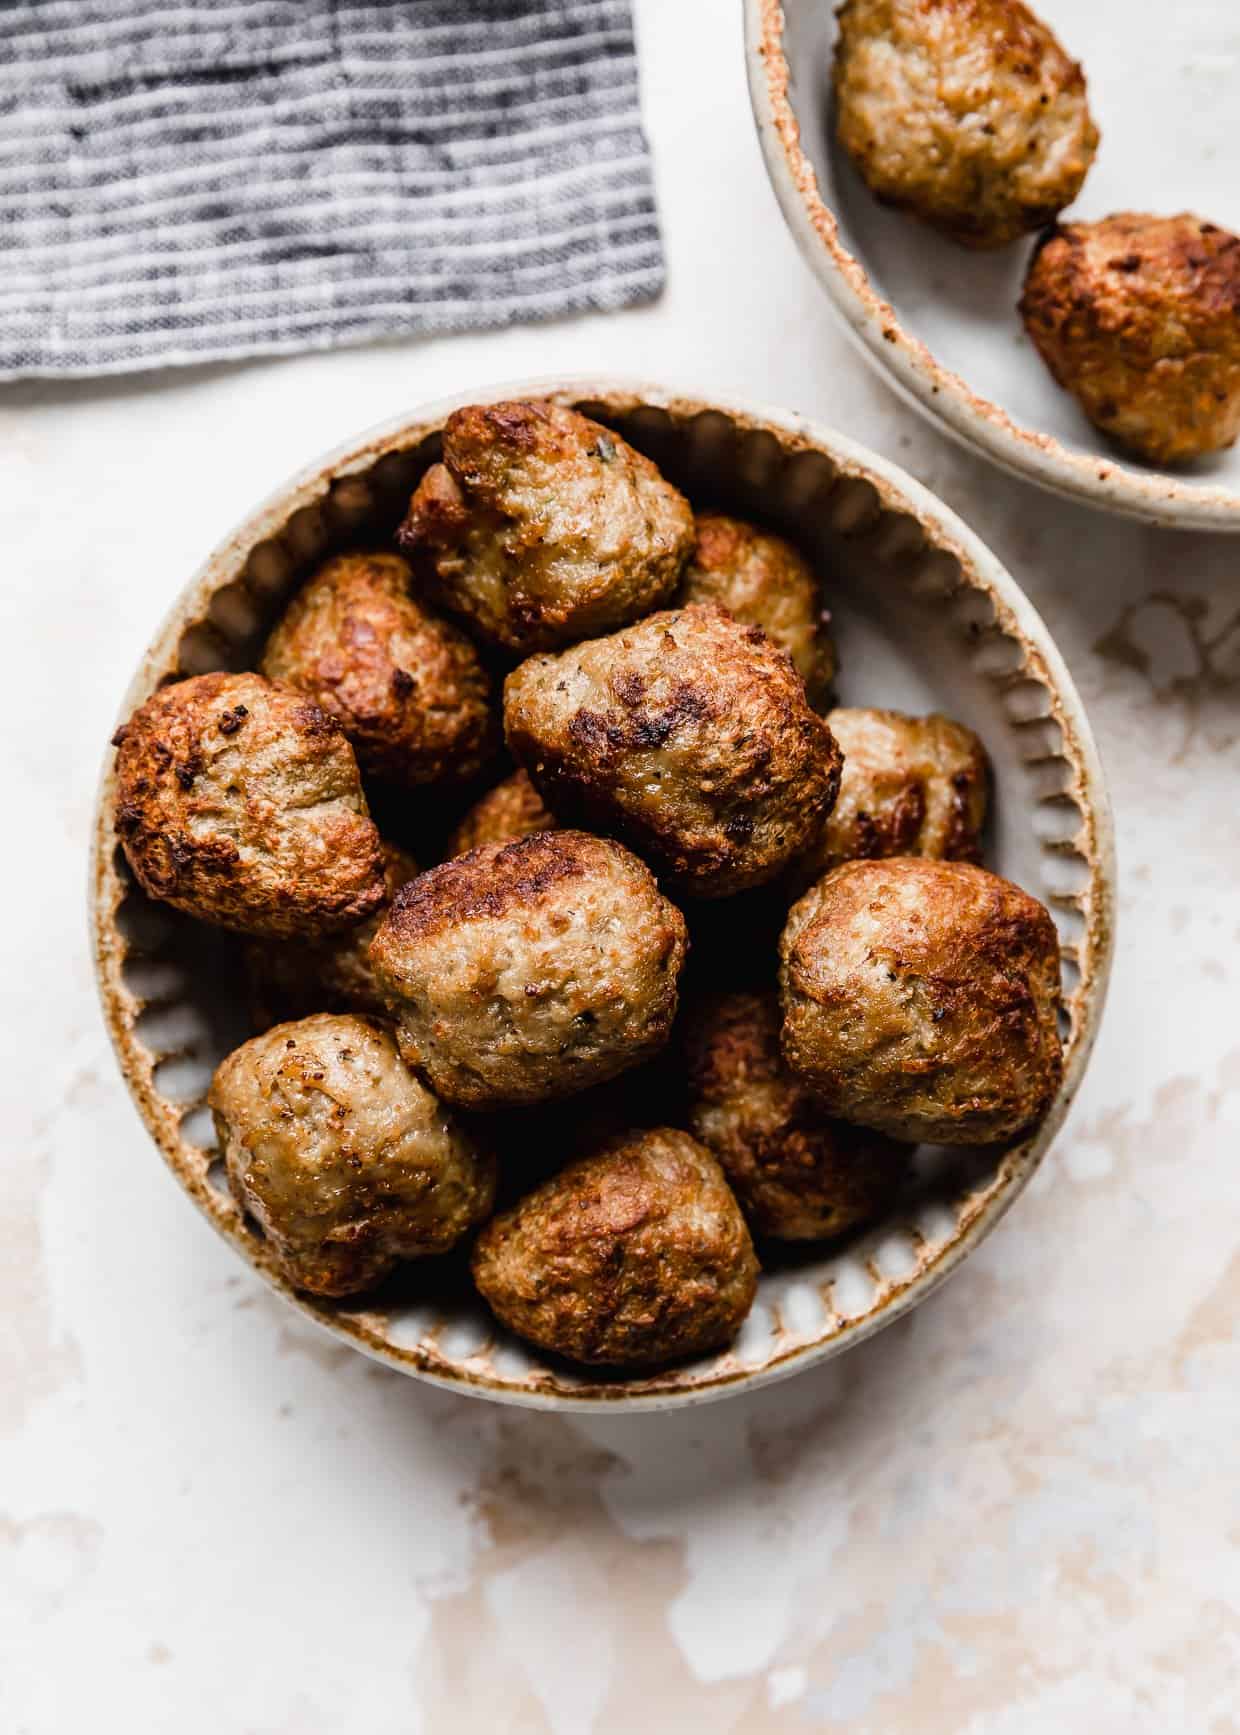 Golden brown and crisped Air Fryer Frozen Meatballs in a ceramic bowl on a white textured background.